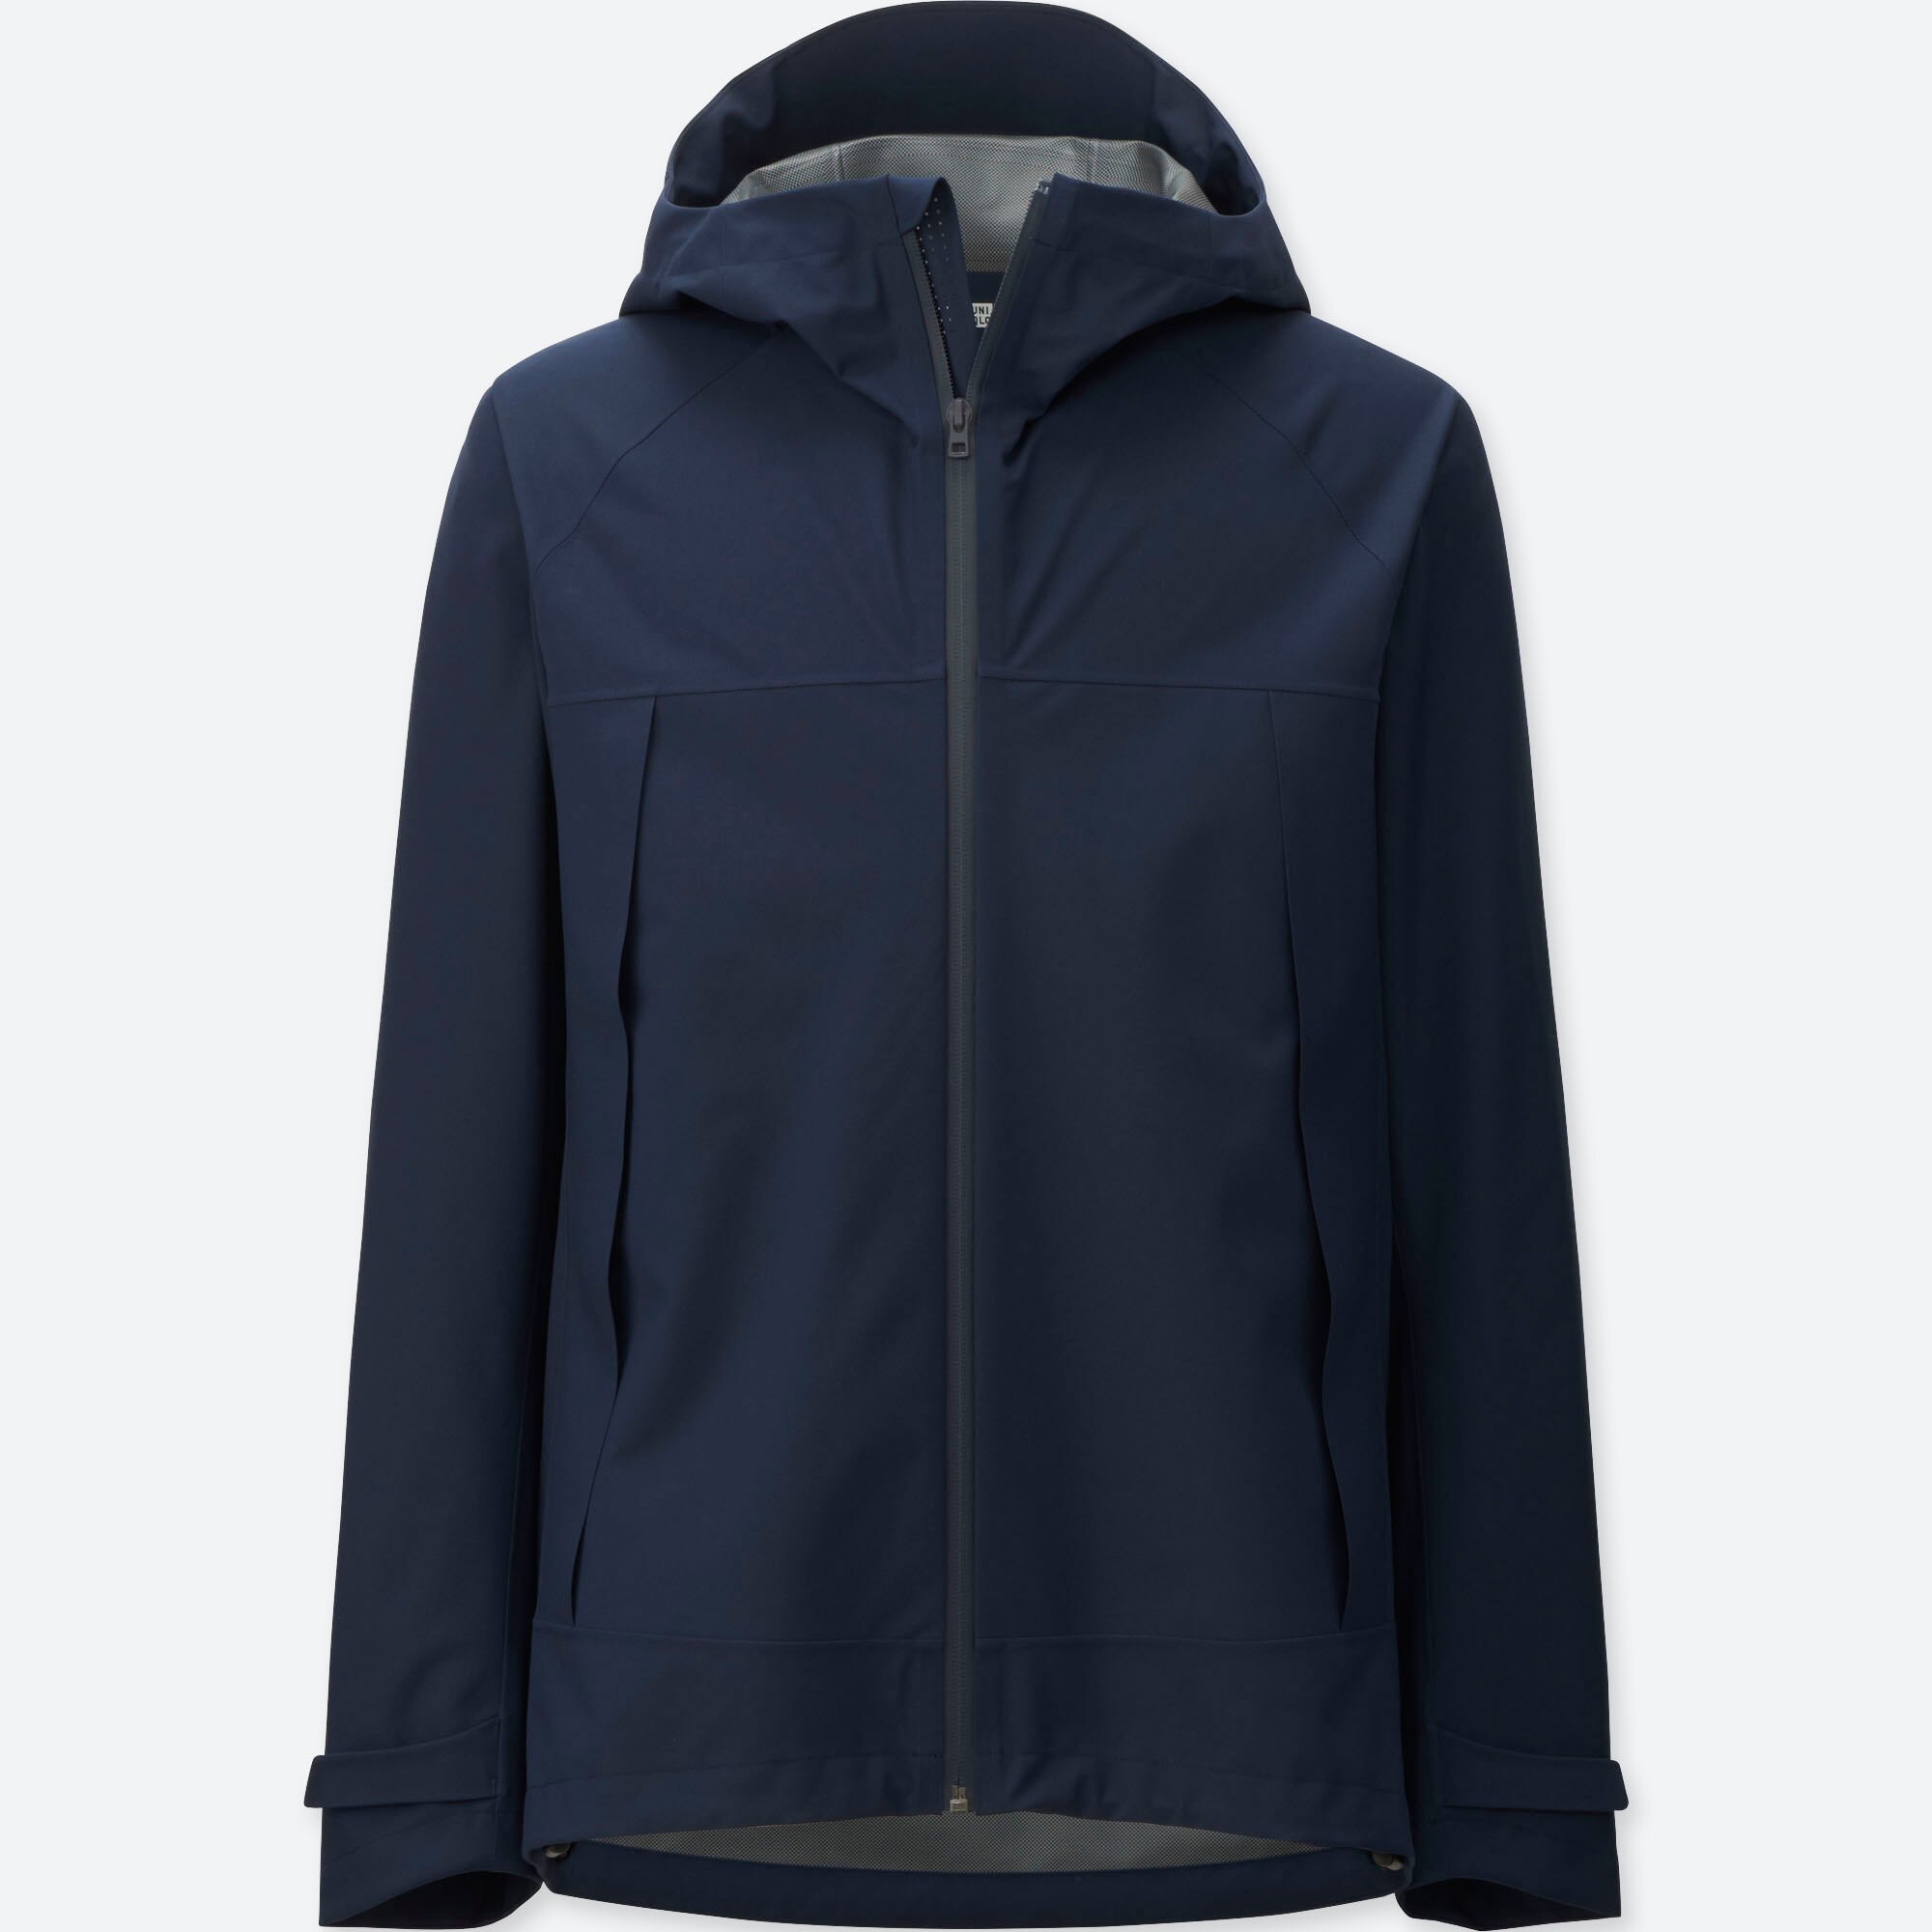 Uniqlo Waterproof Reversible Jacket Navy Mens Fashion Coats Jackets  and Outerwear on Carousell